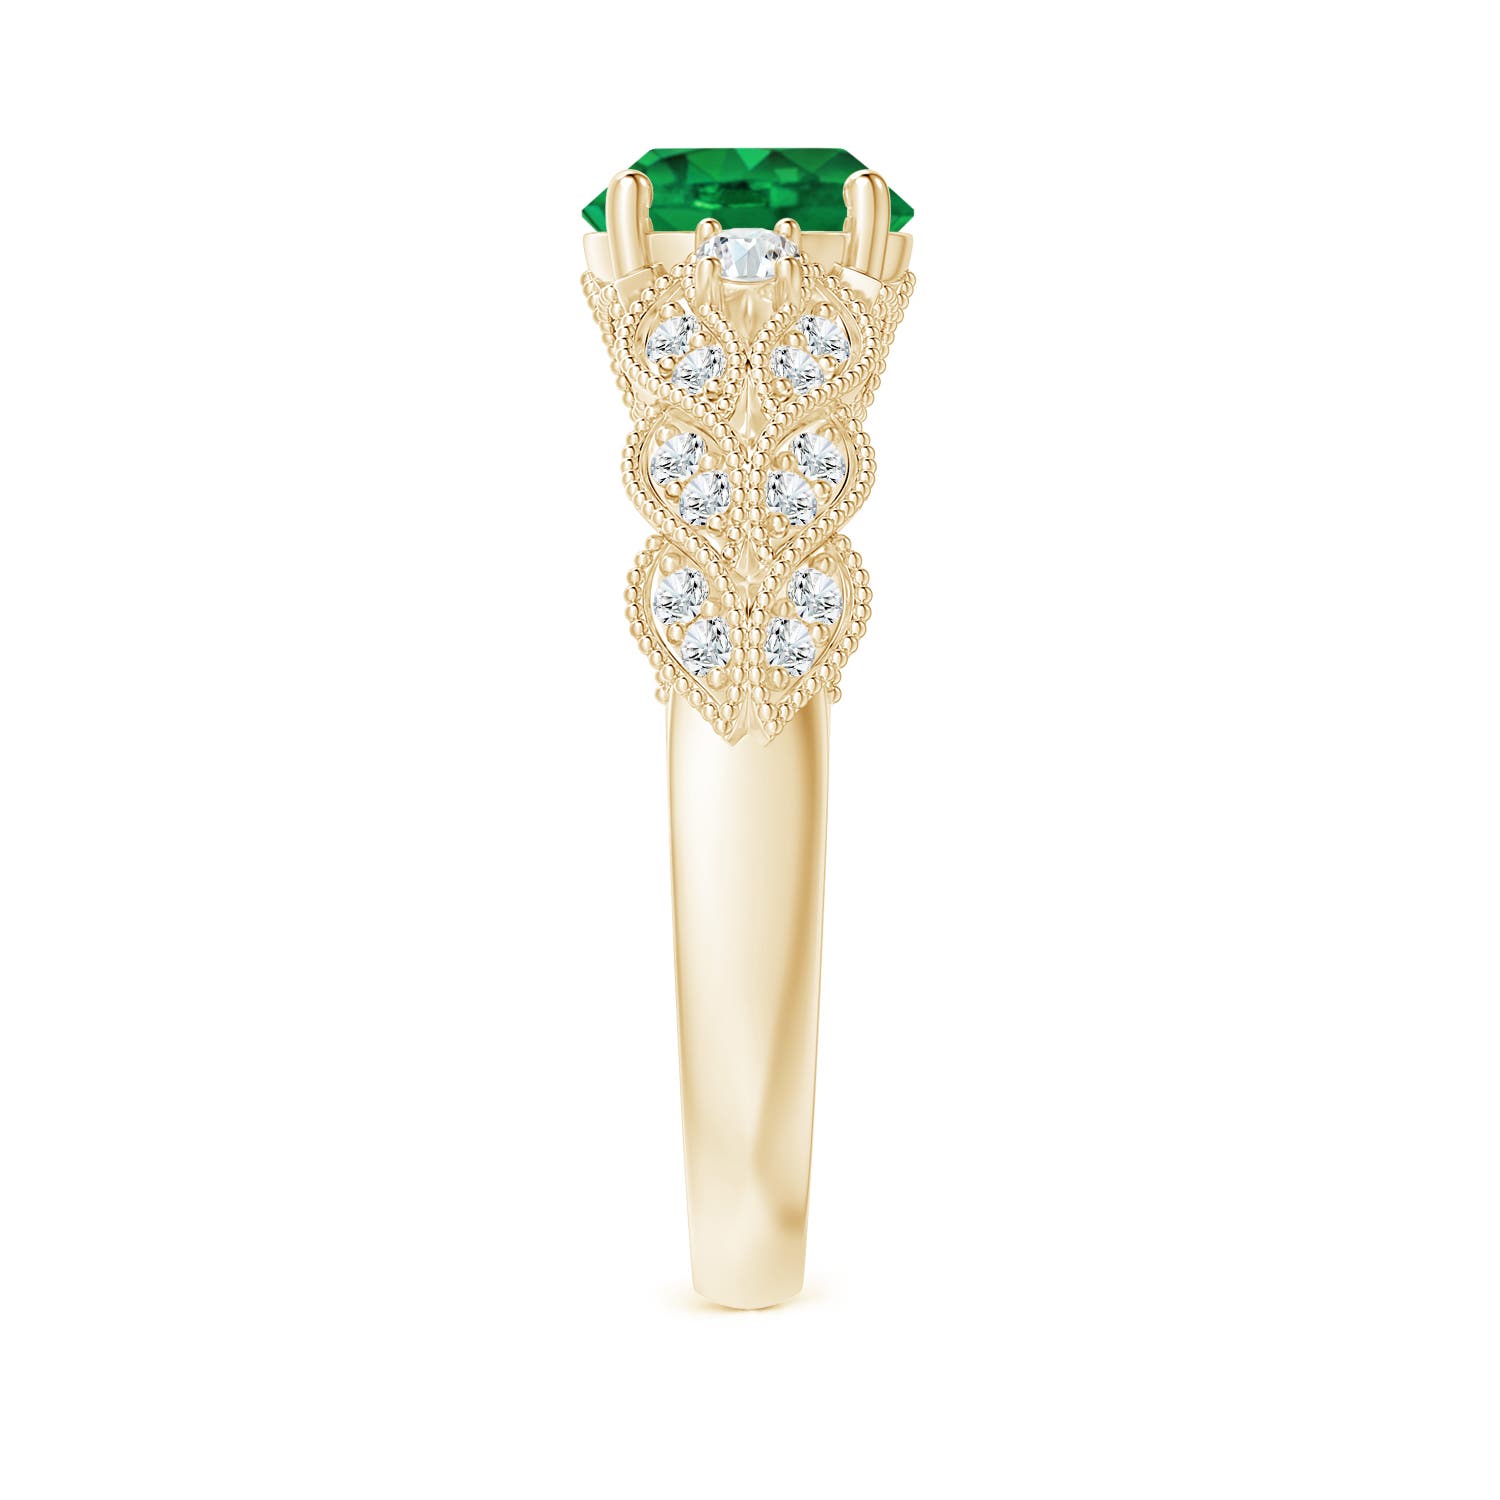 AAA - Emerald / 1.47 CT / 14 KT Yellow Gold